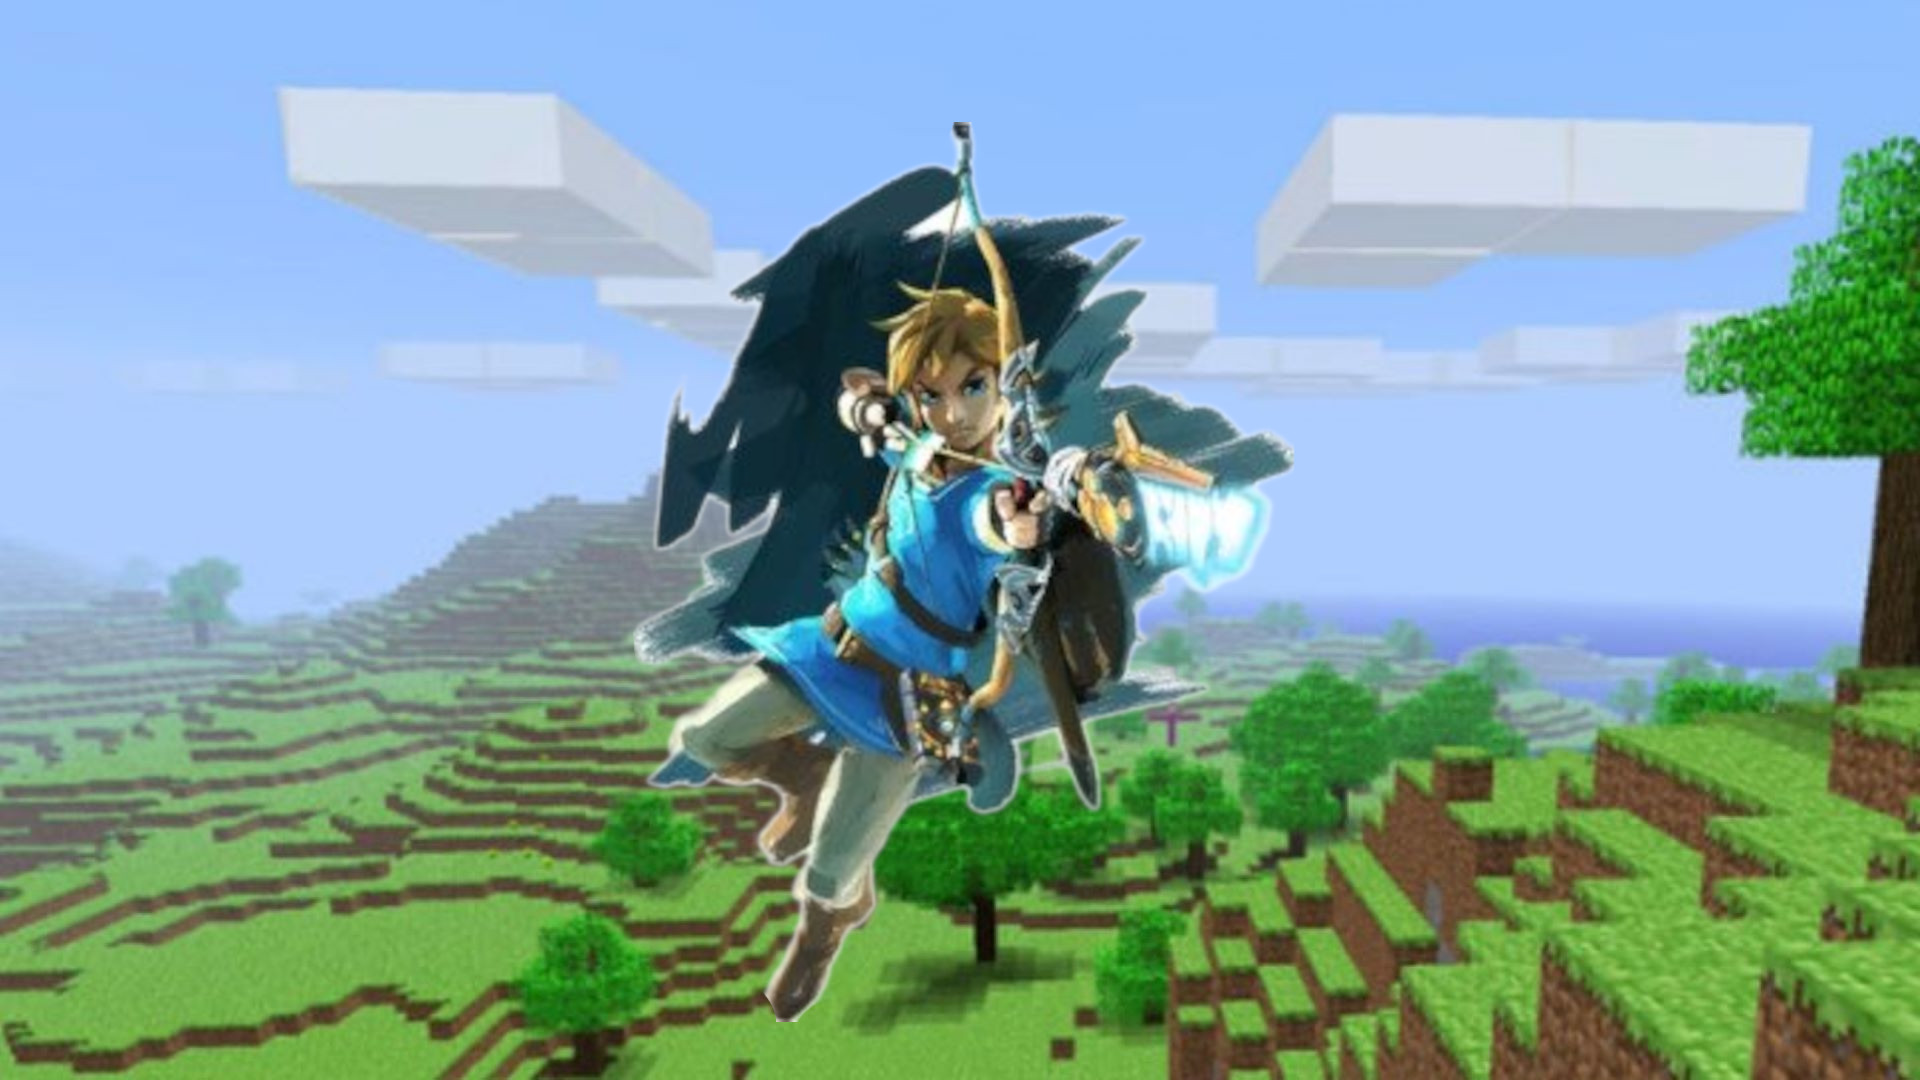 The Legend of Zelda has been faithfully remade in Minecraft without any mods